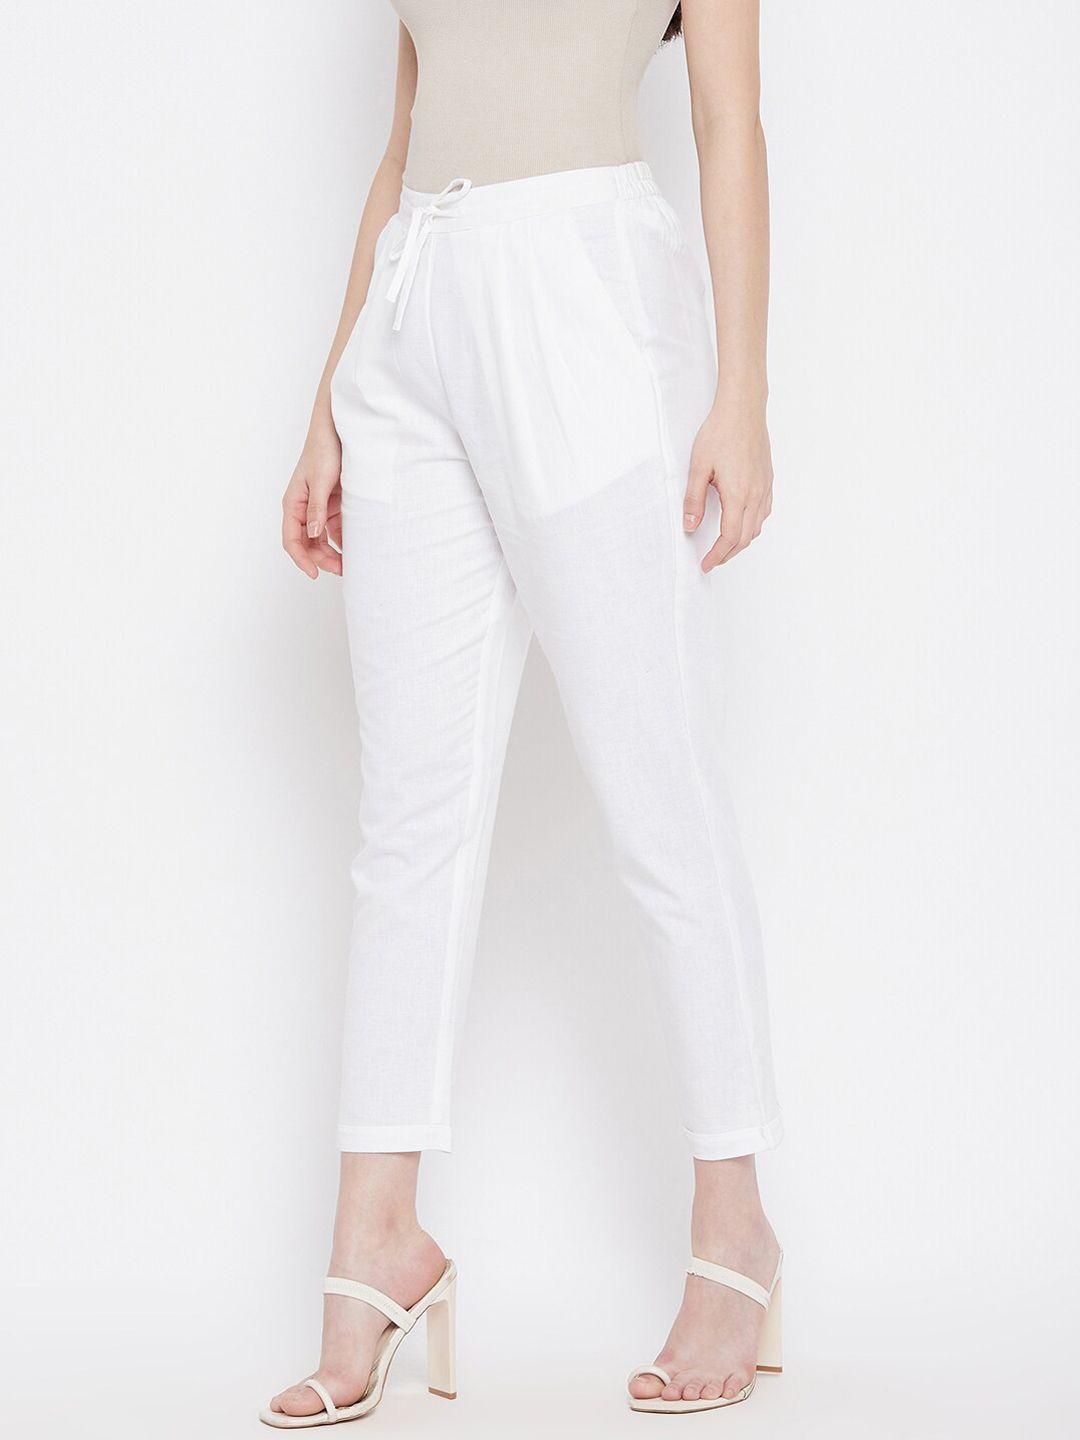 winered-women-white-trousers